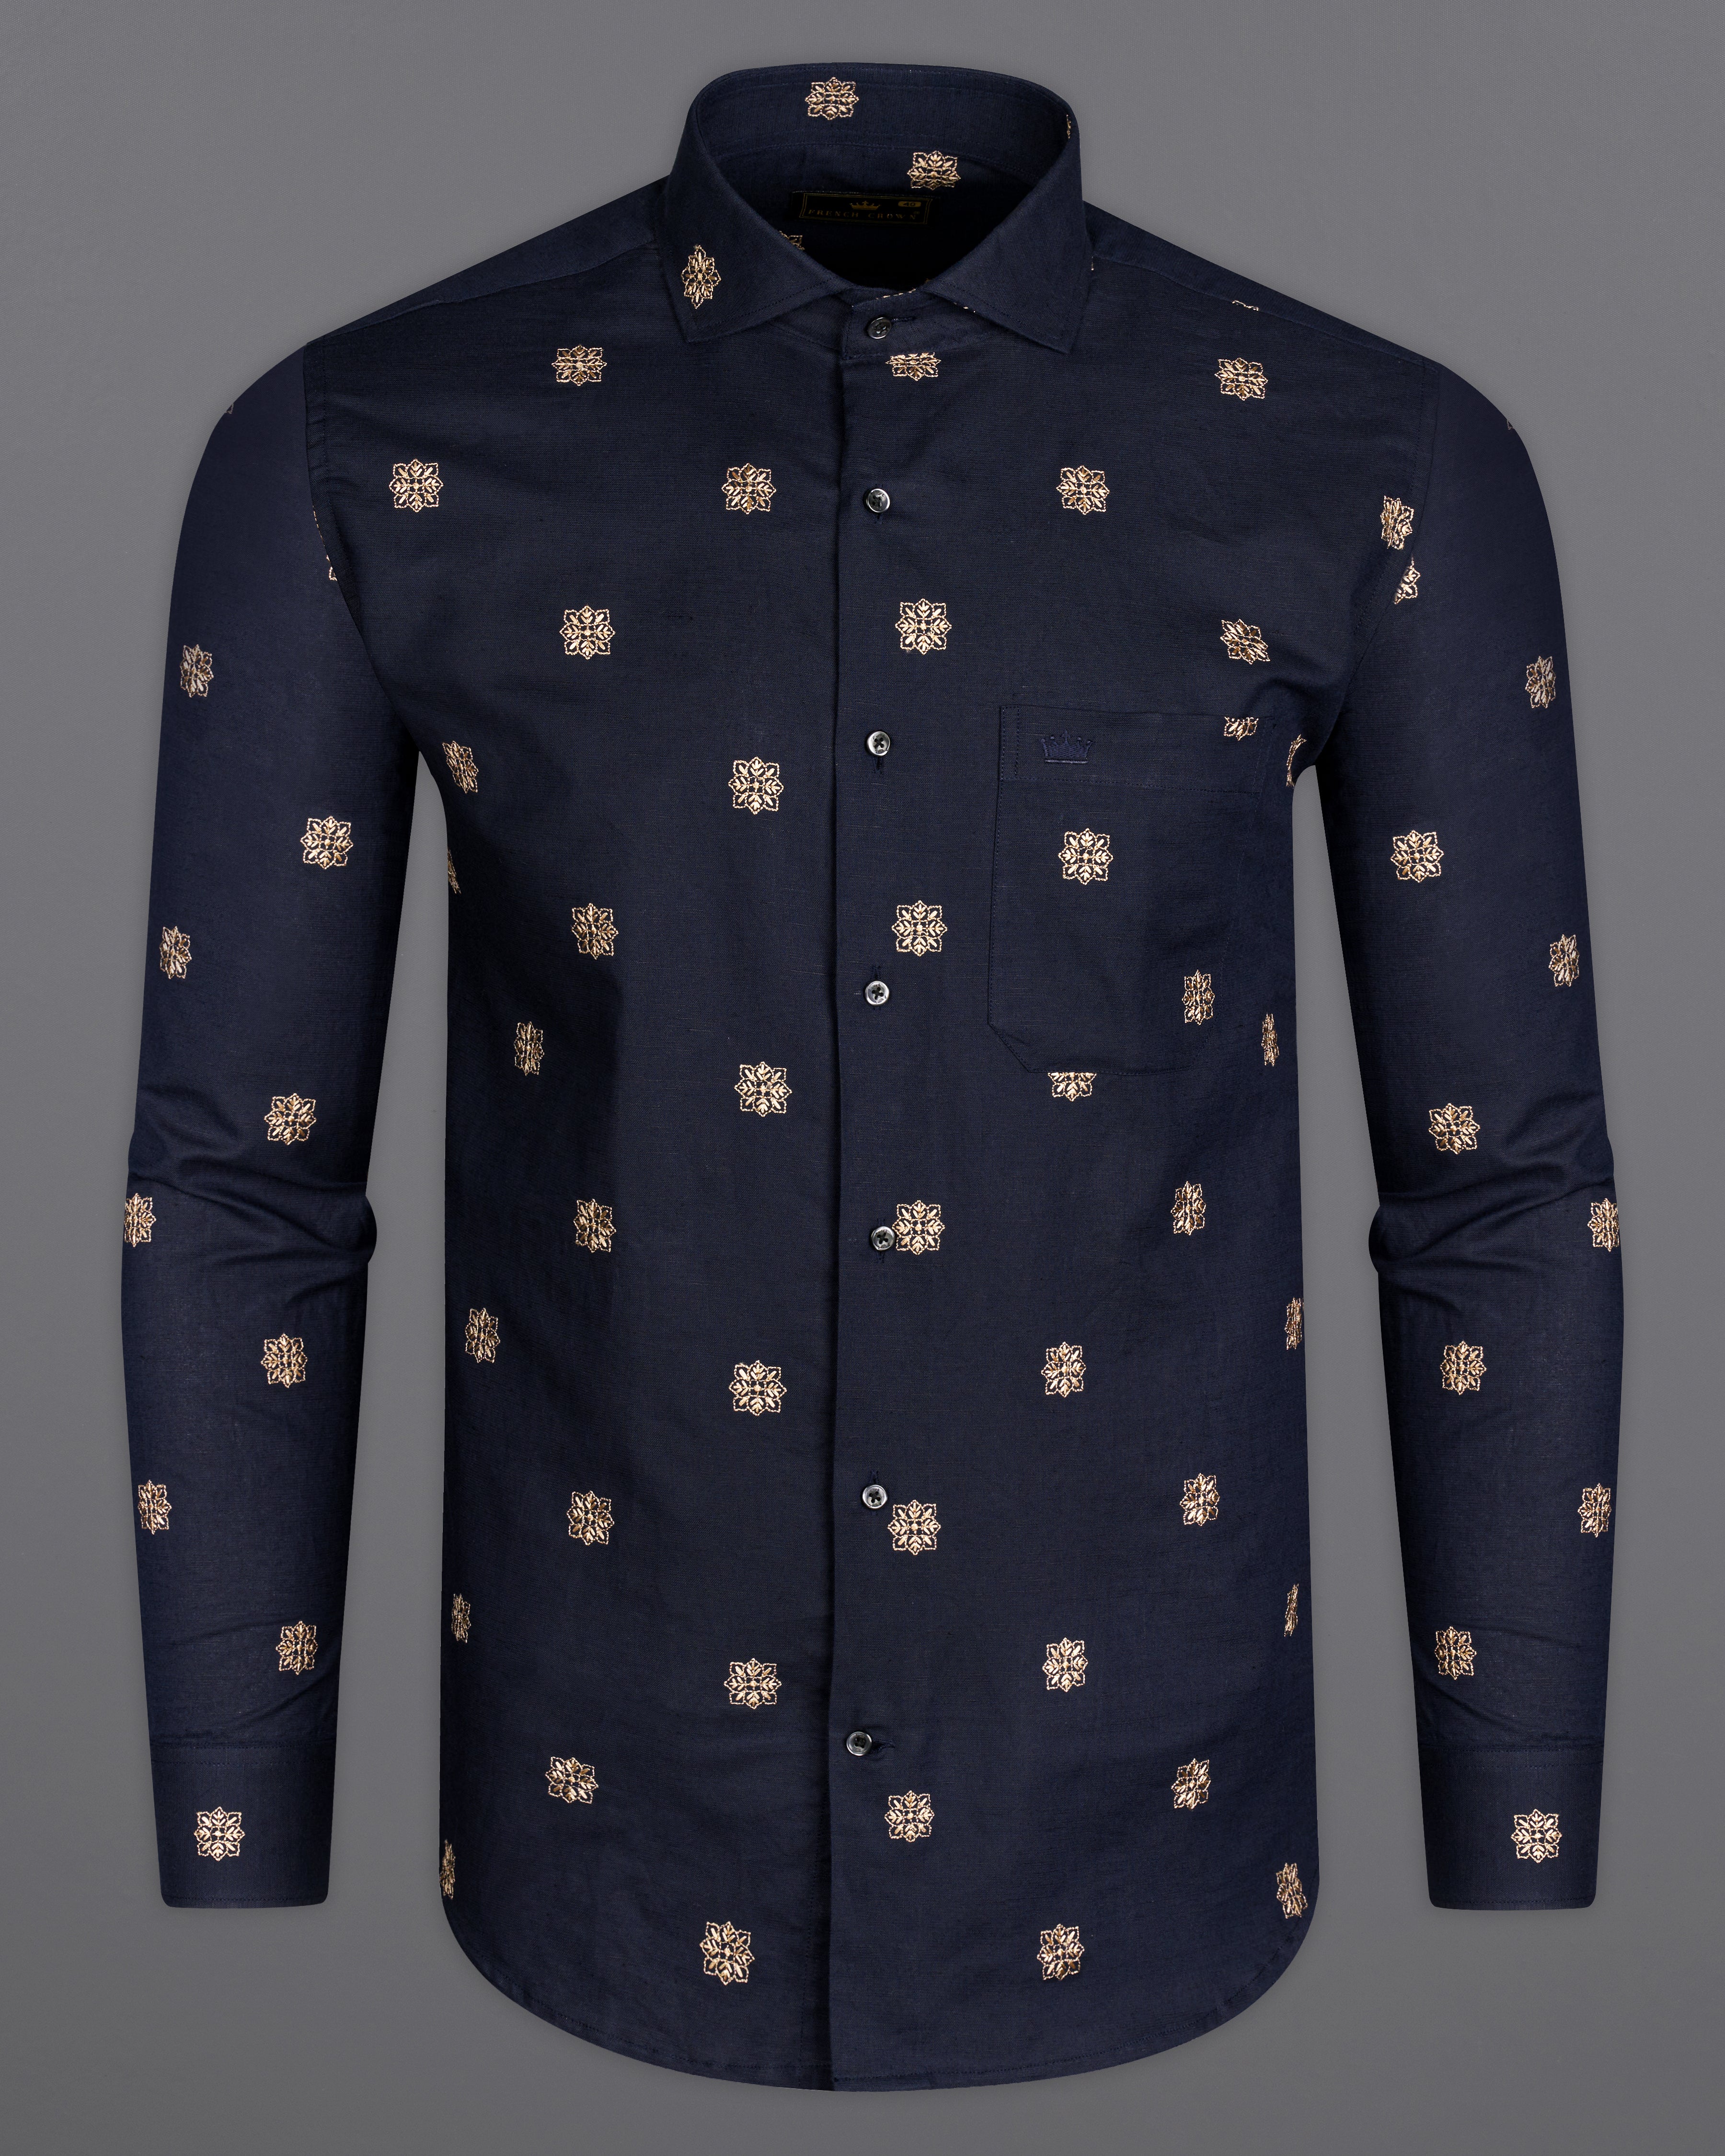 Mirage Navy Blue with Embroidered Luxurious Linen Shirt 9827-CA-BLK-38, 9827-CA-BLK-H-38, 9827-CA-BLK-39, 9827-CA-BLK-H-39, 9827-CA-BLK-40, 9827-CA-BLK-H-40, 9827-CA-BLK-42, 9827-CA-BLK-H-42, 9827-CA-BLK-44, 9827-CA-BLK-H-44, 9827-CA-BLK-46, 9827-CA-BLK-H-46, 9827-CA-BLK-48, 9827-CA-BLK-H-48, 9827-CA-BLK-50, 9827-CA-BLK-H-50, 9827-CA-BLK-52, 9827-CA-BLK-H-52